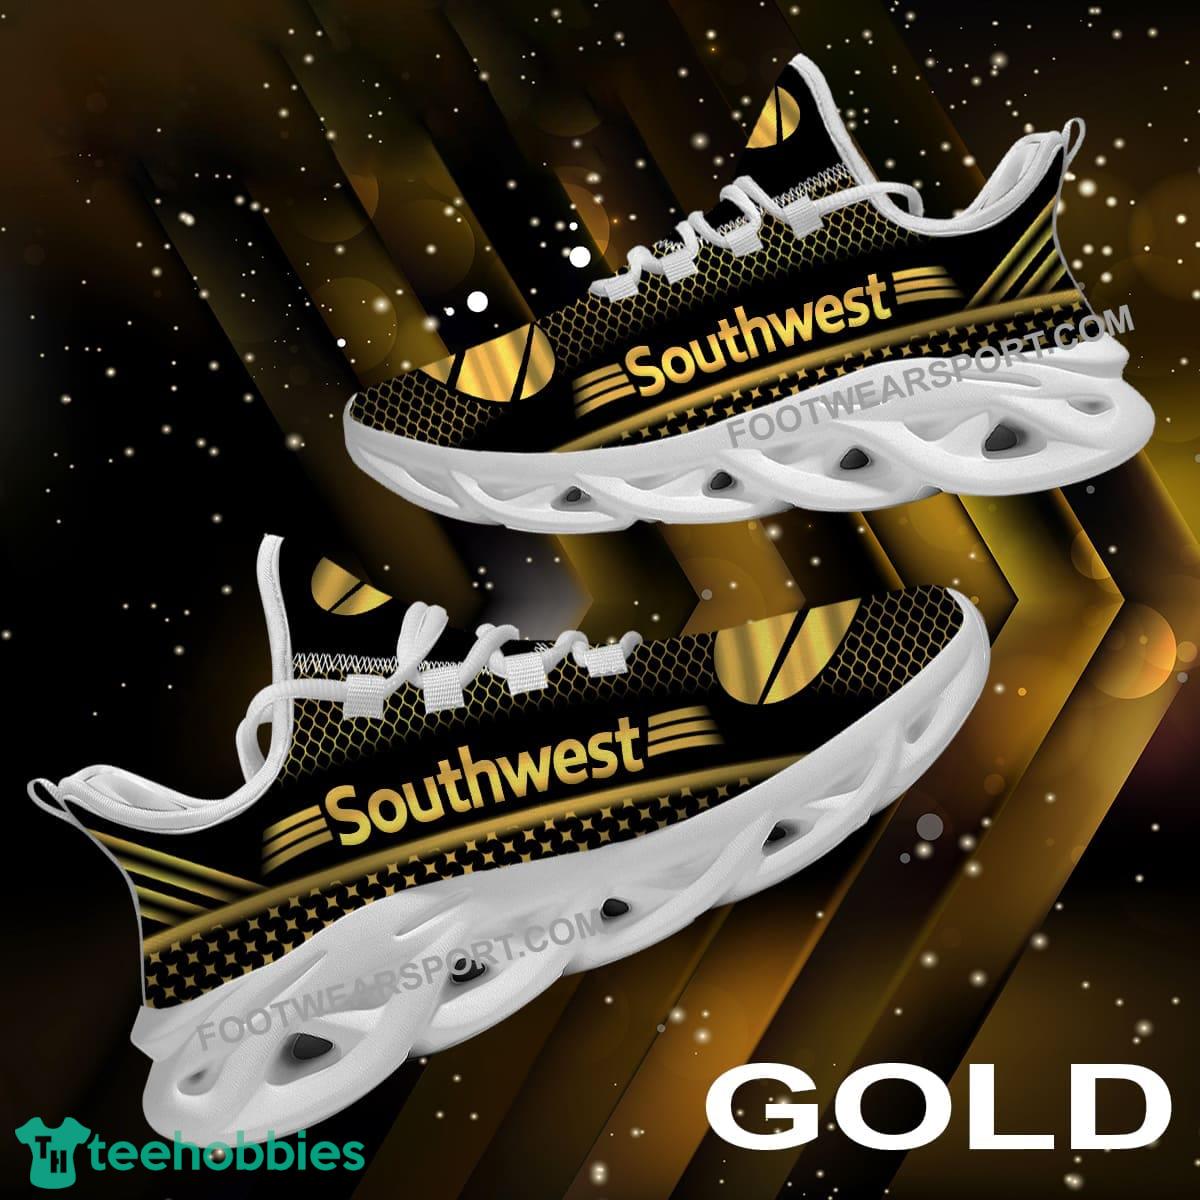 Southwest Airlines Max Soul Shoes Gold Sport Sneaker High-quality For Fans Gift - Southwest Airlines Max Soul Shoes Gold Sport Sneaker High-quality For Fans Gift